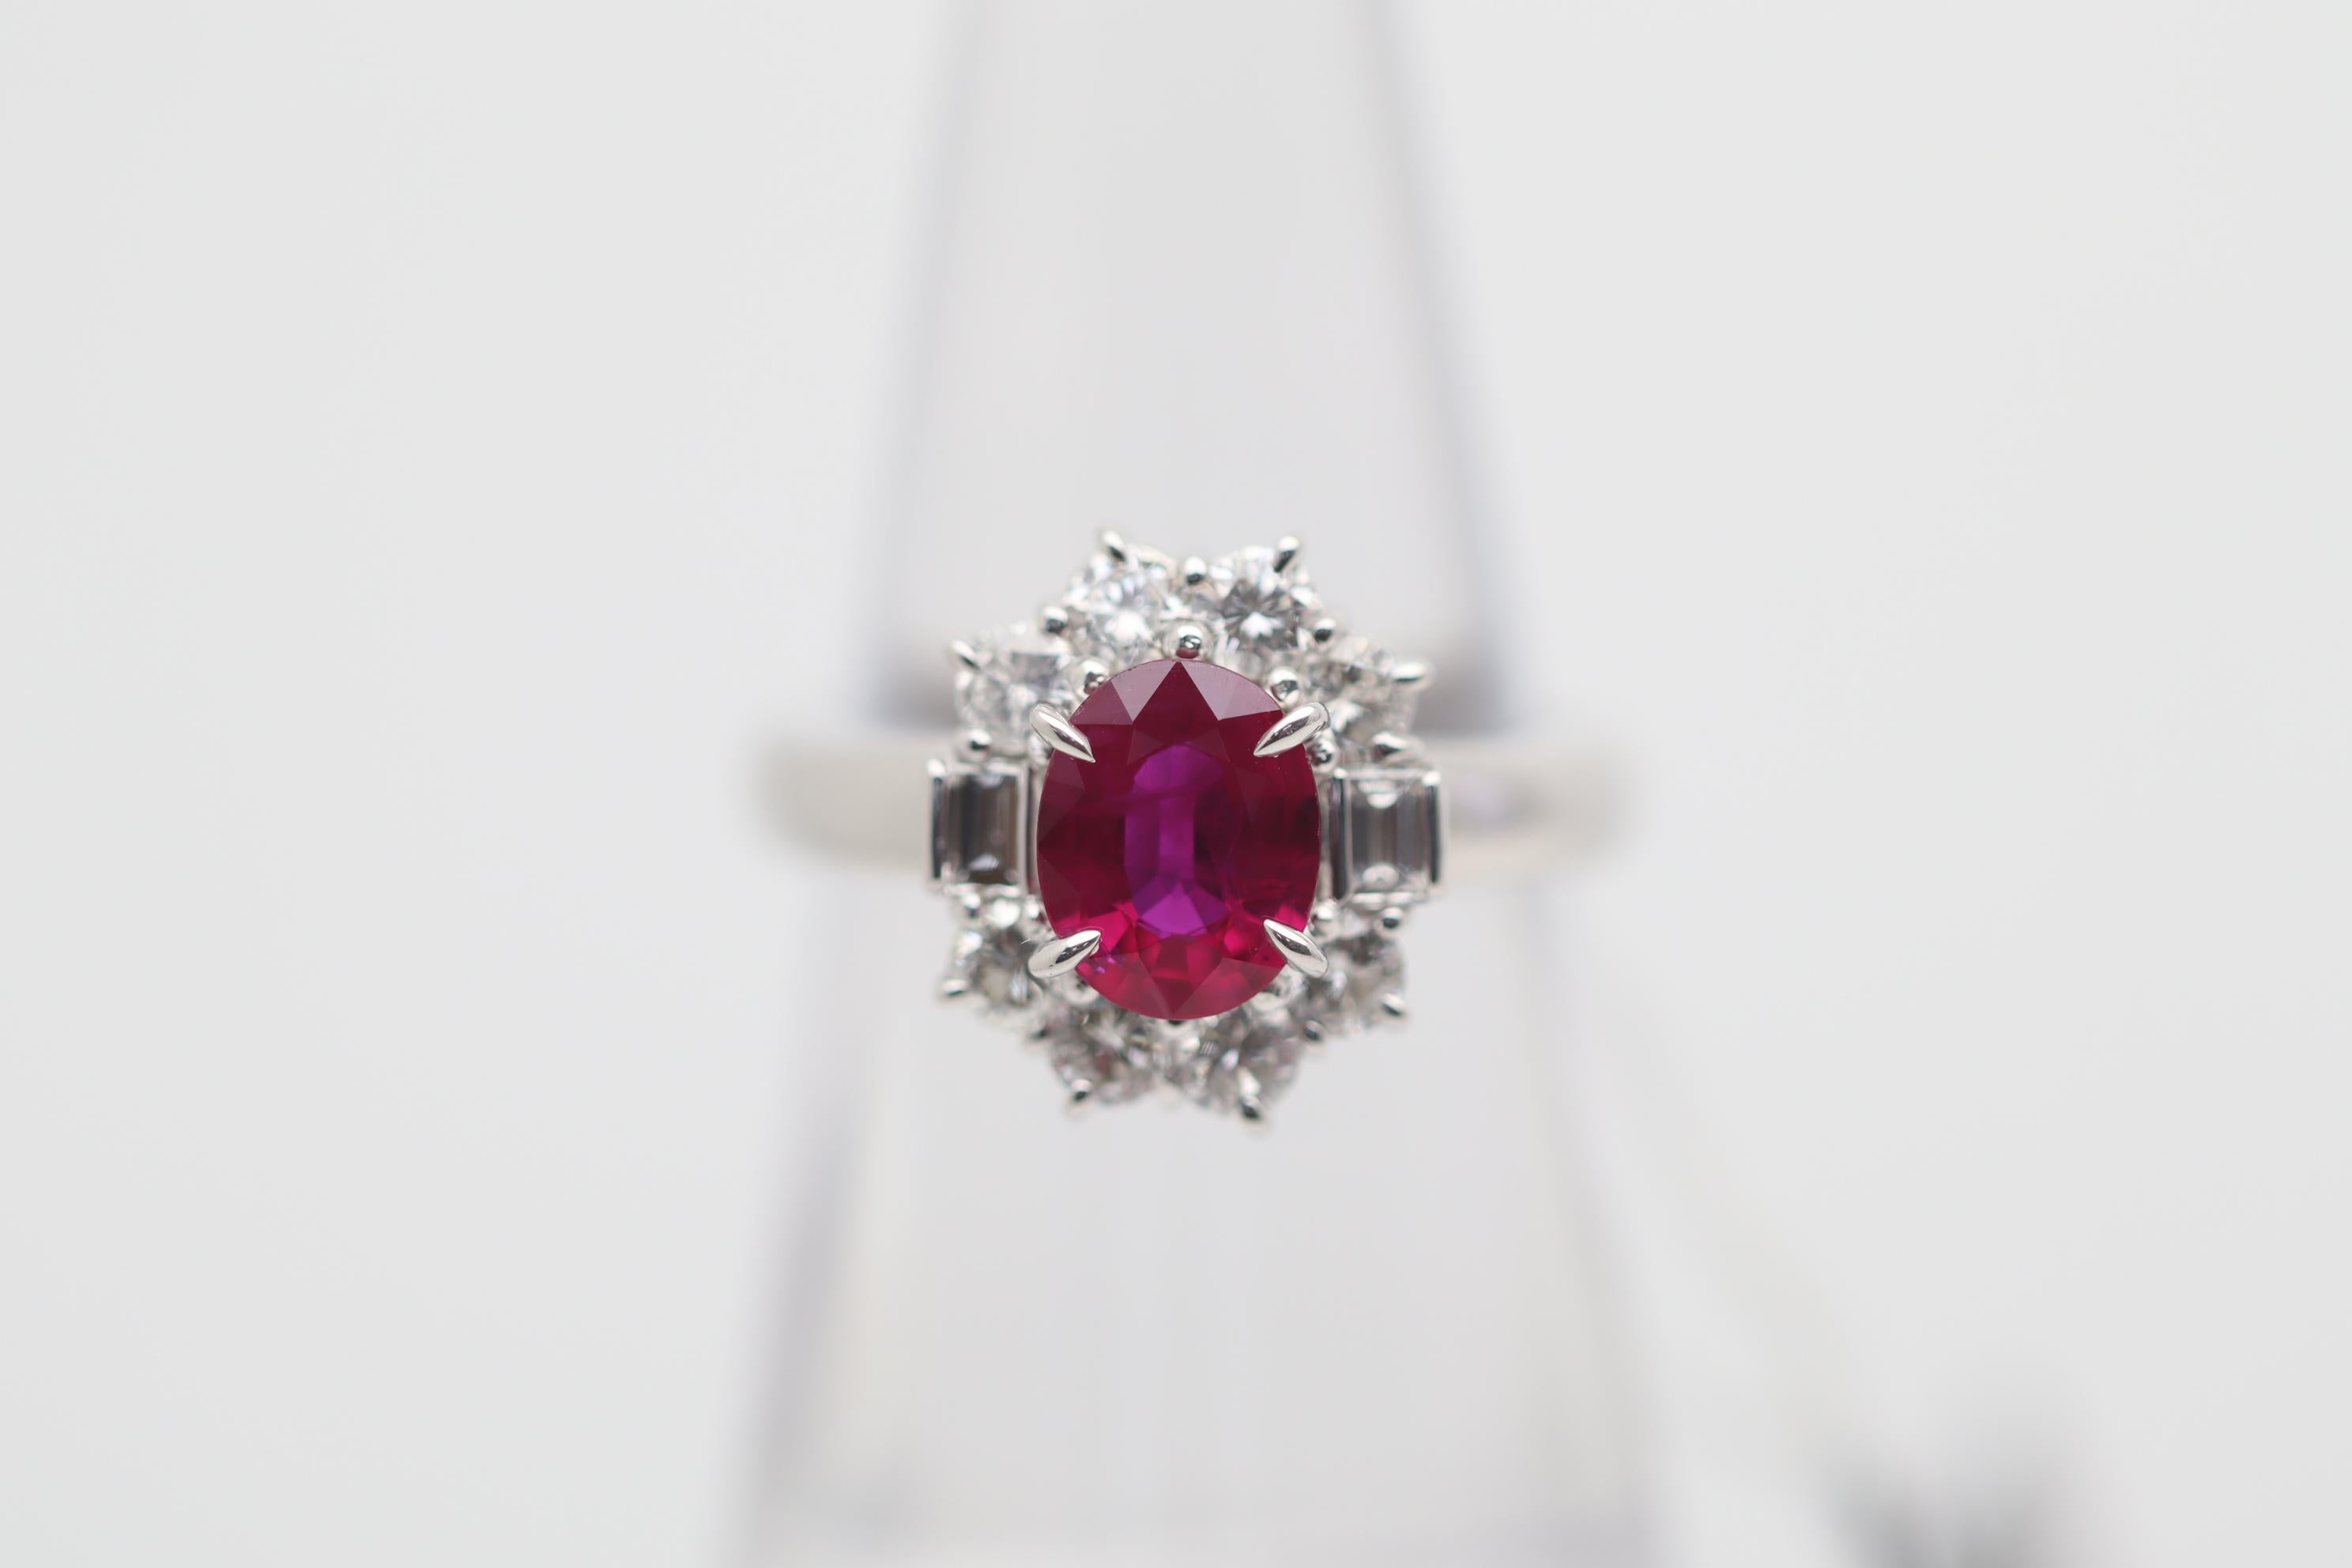 A chic and classy gemstone diamond ring featuring a fine natural Burmese ruby. The ruby weighs 1.17 carats and has a bright and vibrant cherry-red color, a classic Burmese color. It is complemented by 0.89 carats of diamonds set around the ruby in a